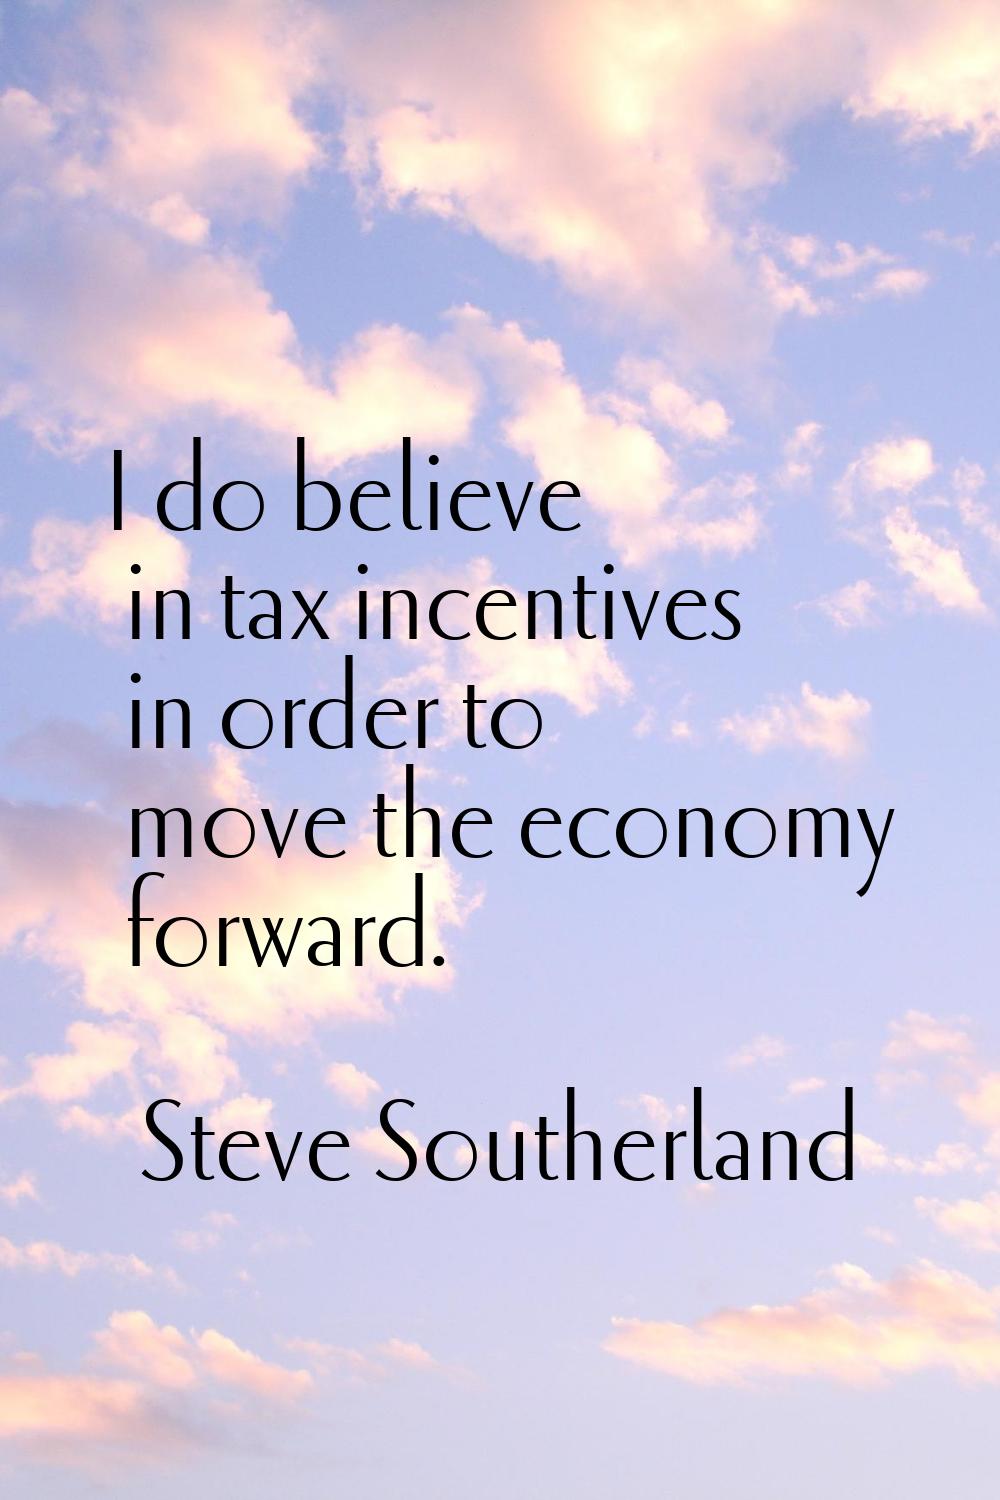 I do believe in tax incentives in order to move the economy forward.